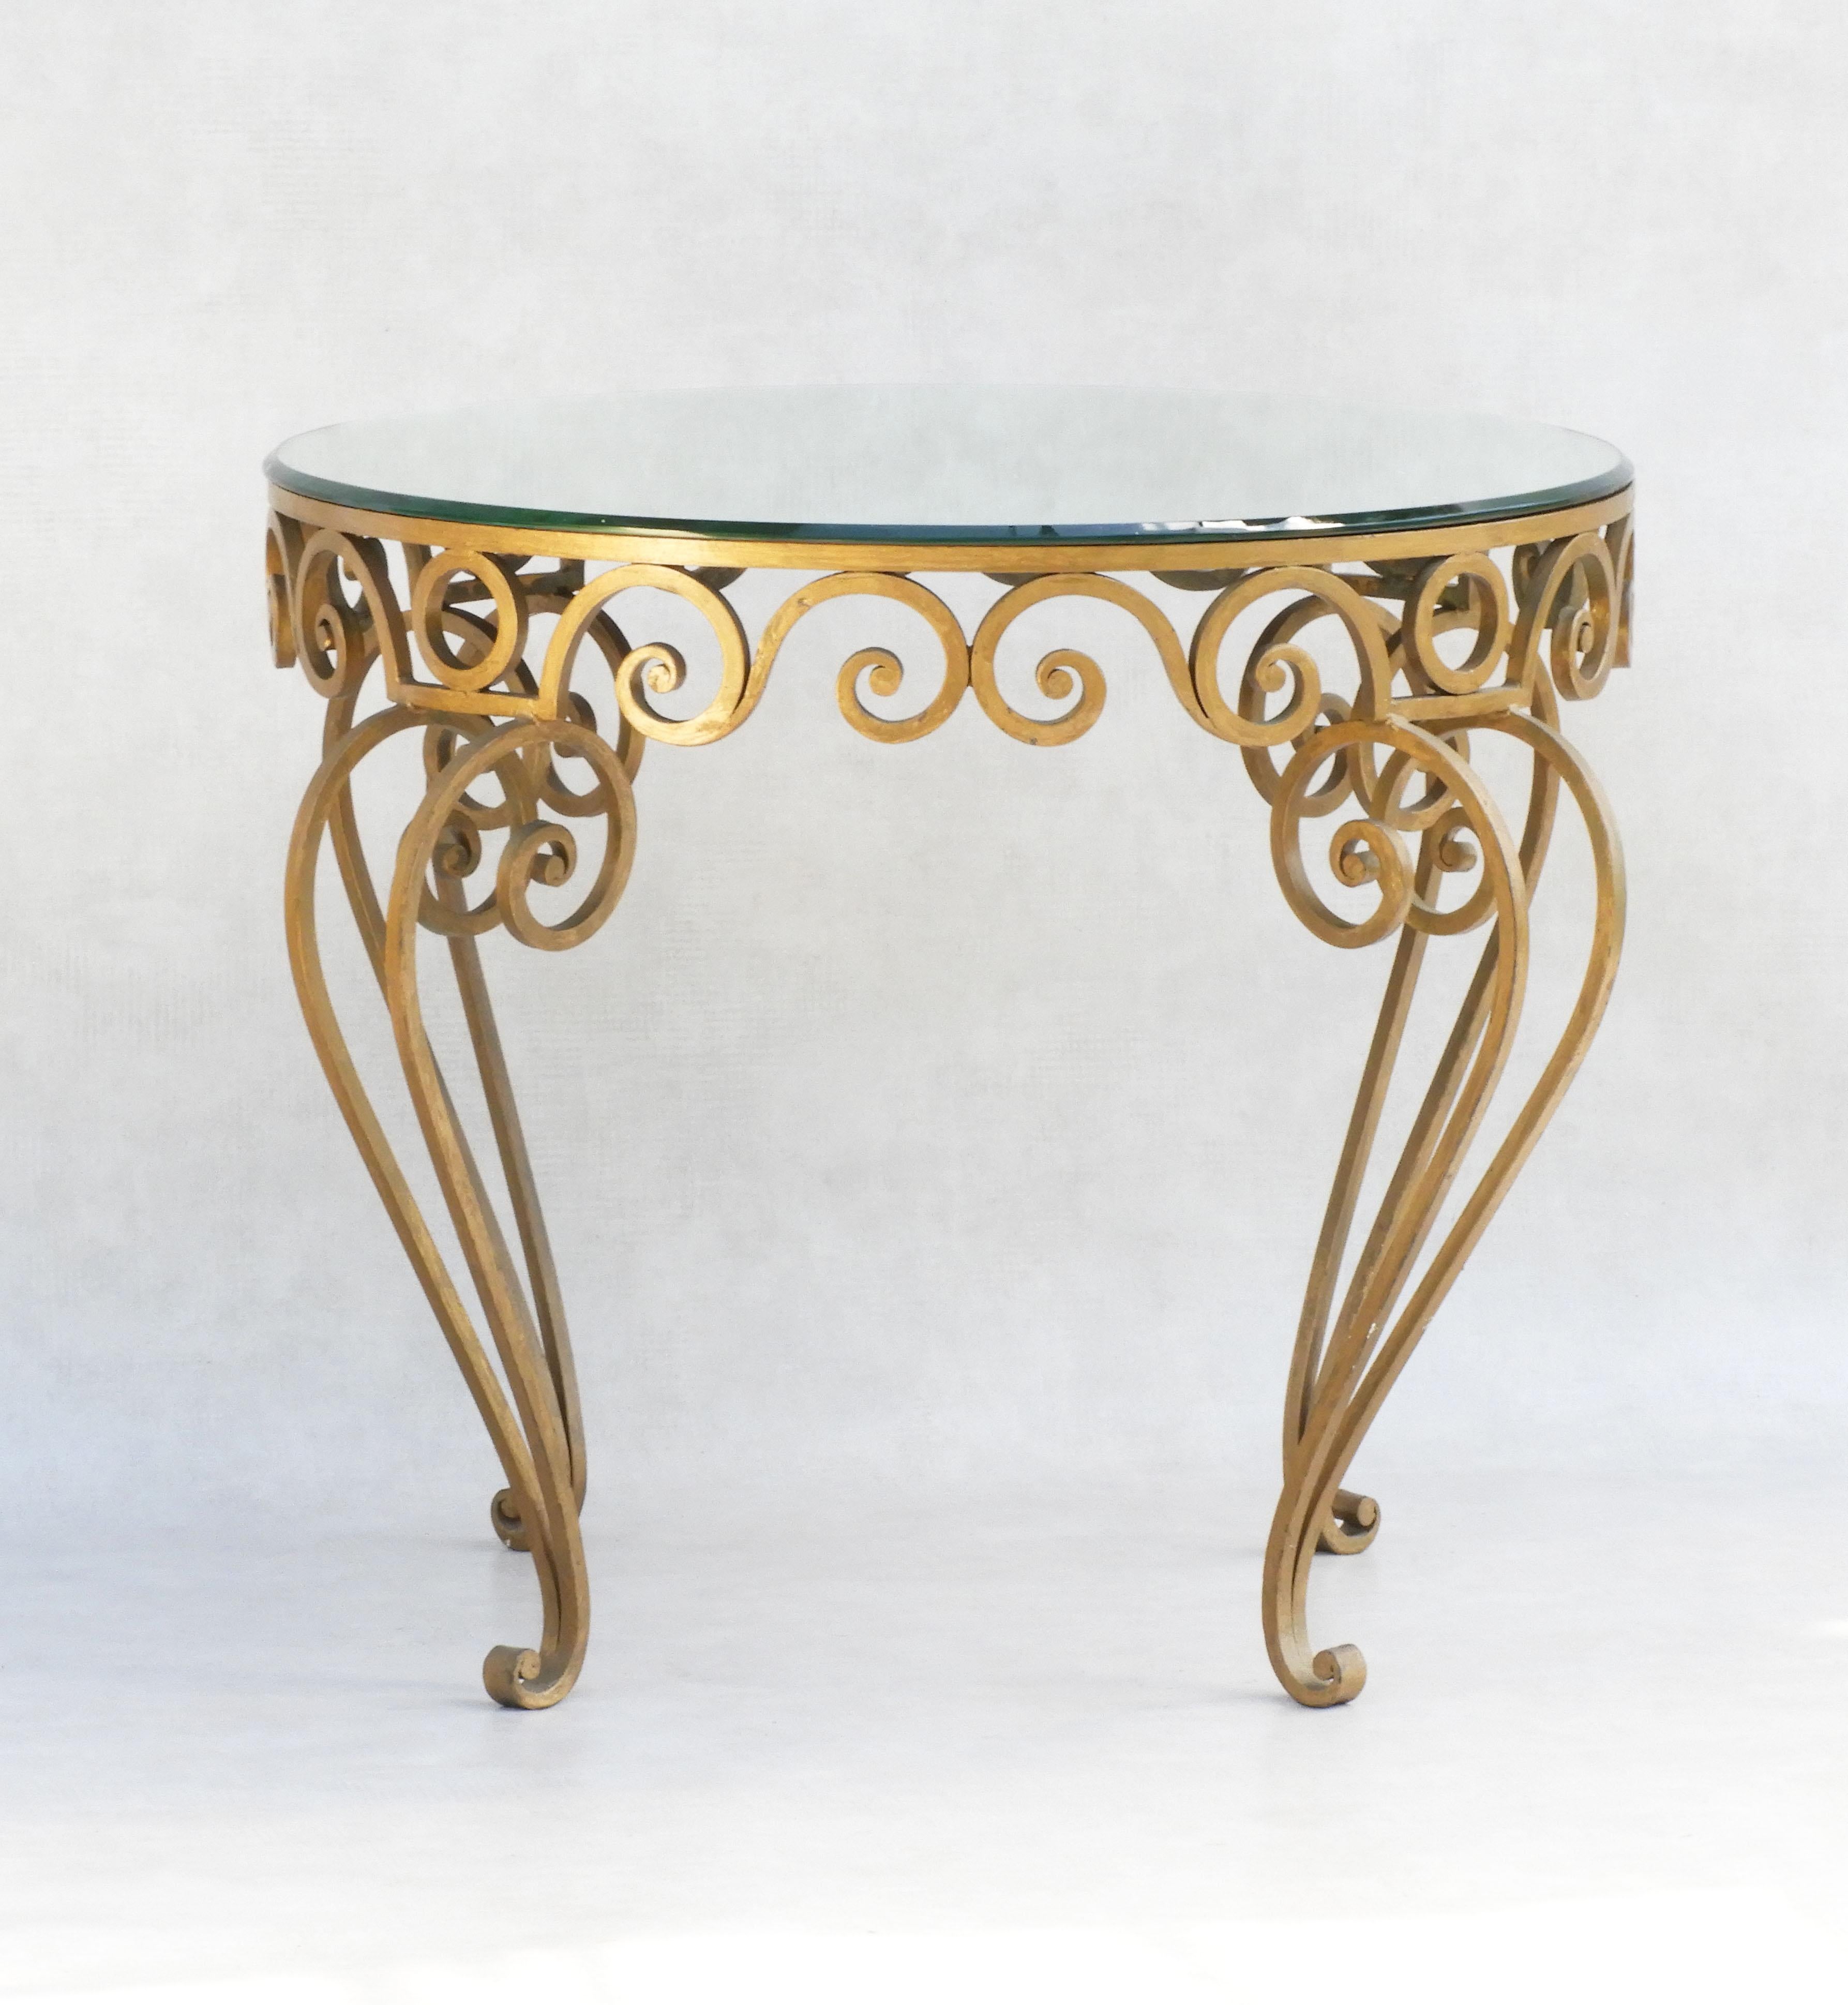 Vintage French Hollywood Regency Style coffee table circa 1950.
Stunning gold wrought iron mirror top occasional table. Hand forged wrought iron frame with original round bevelled mirror top.
In great condition with good patina, no losses to glass